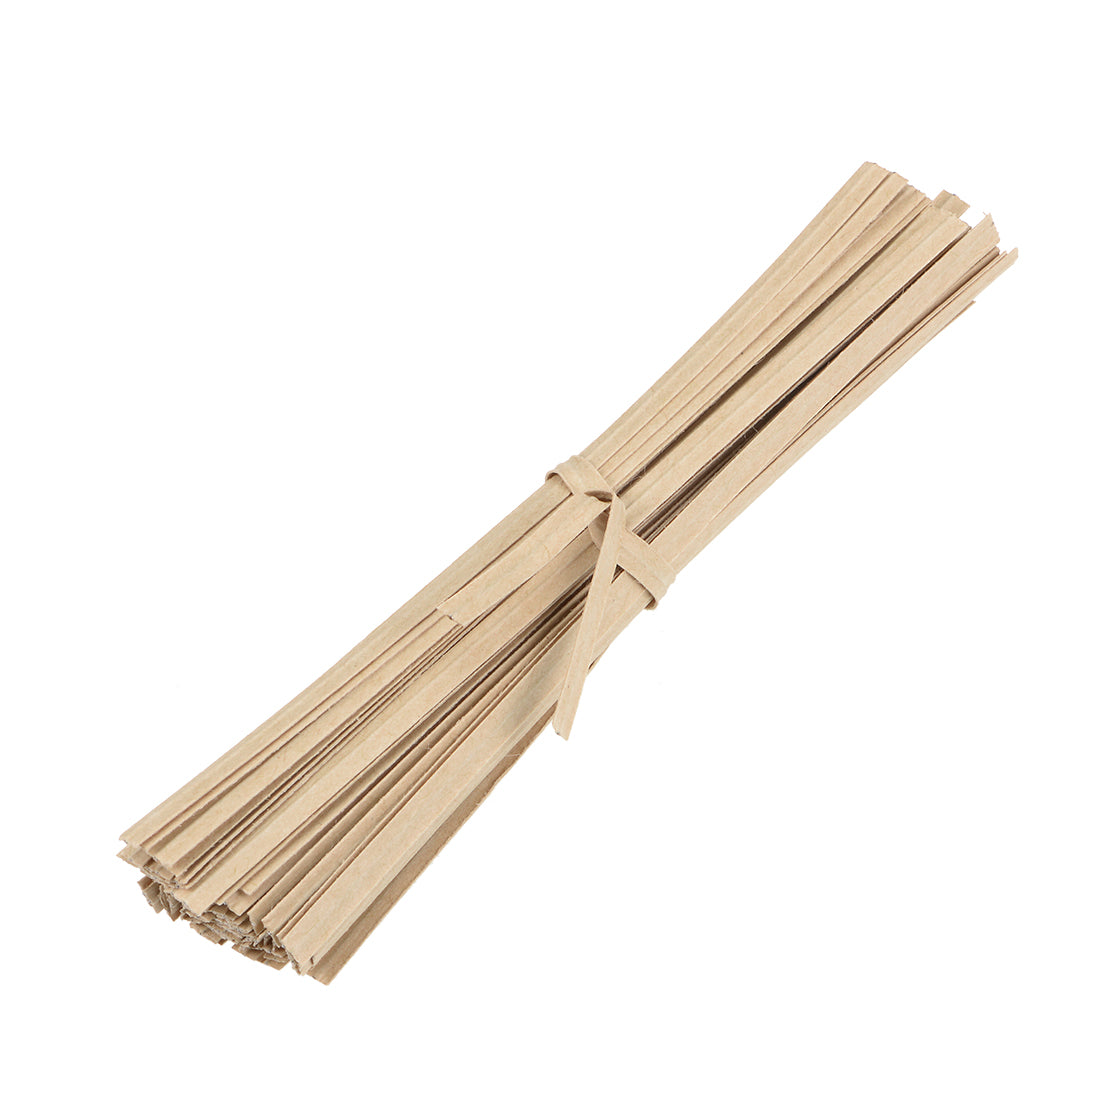 uxcell Uxcell Long Strong Twist Ties 4 Inches Quality  Closure Tie for Tying Gift Bags Art Craft Ties Manage Cords Khaki 1000pcs